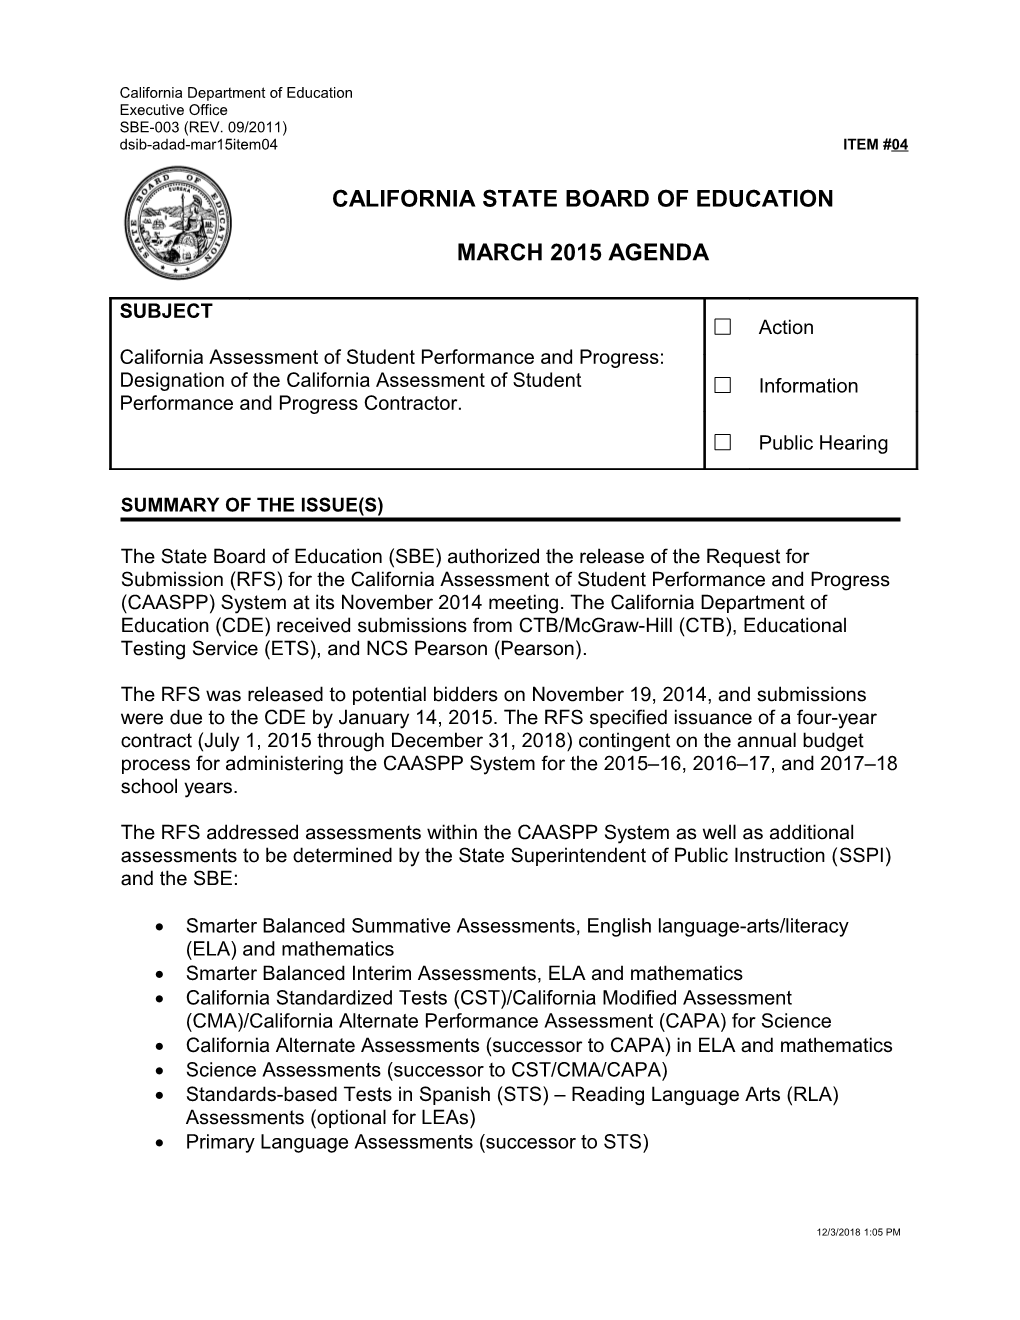 March 2015 Agenda Item 04 - Meeting Agendas (CA State Board of Education)